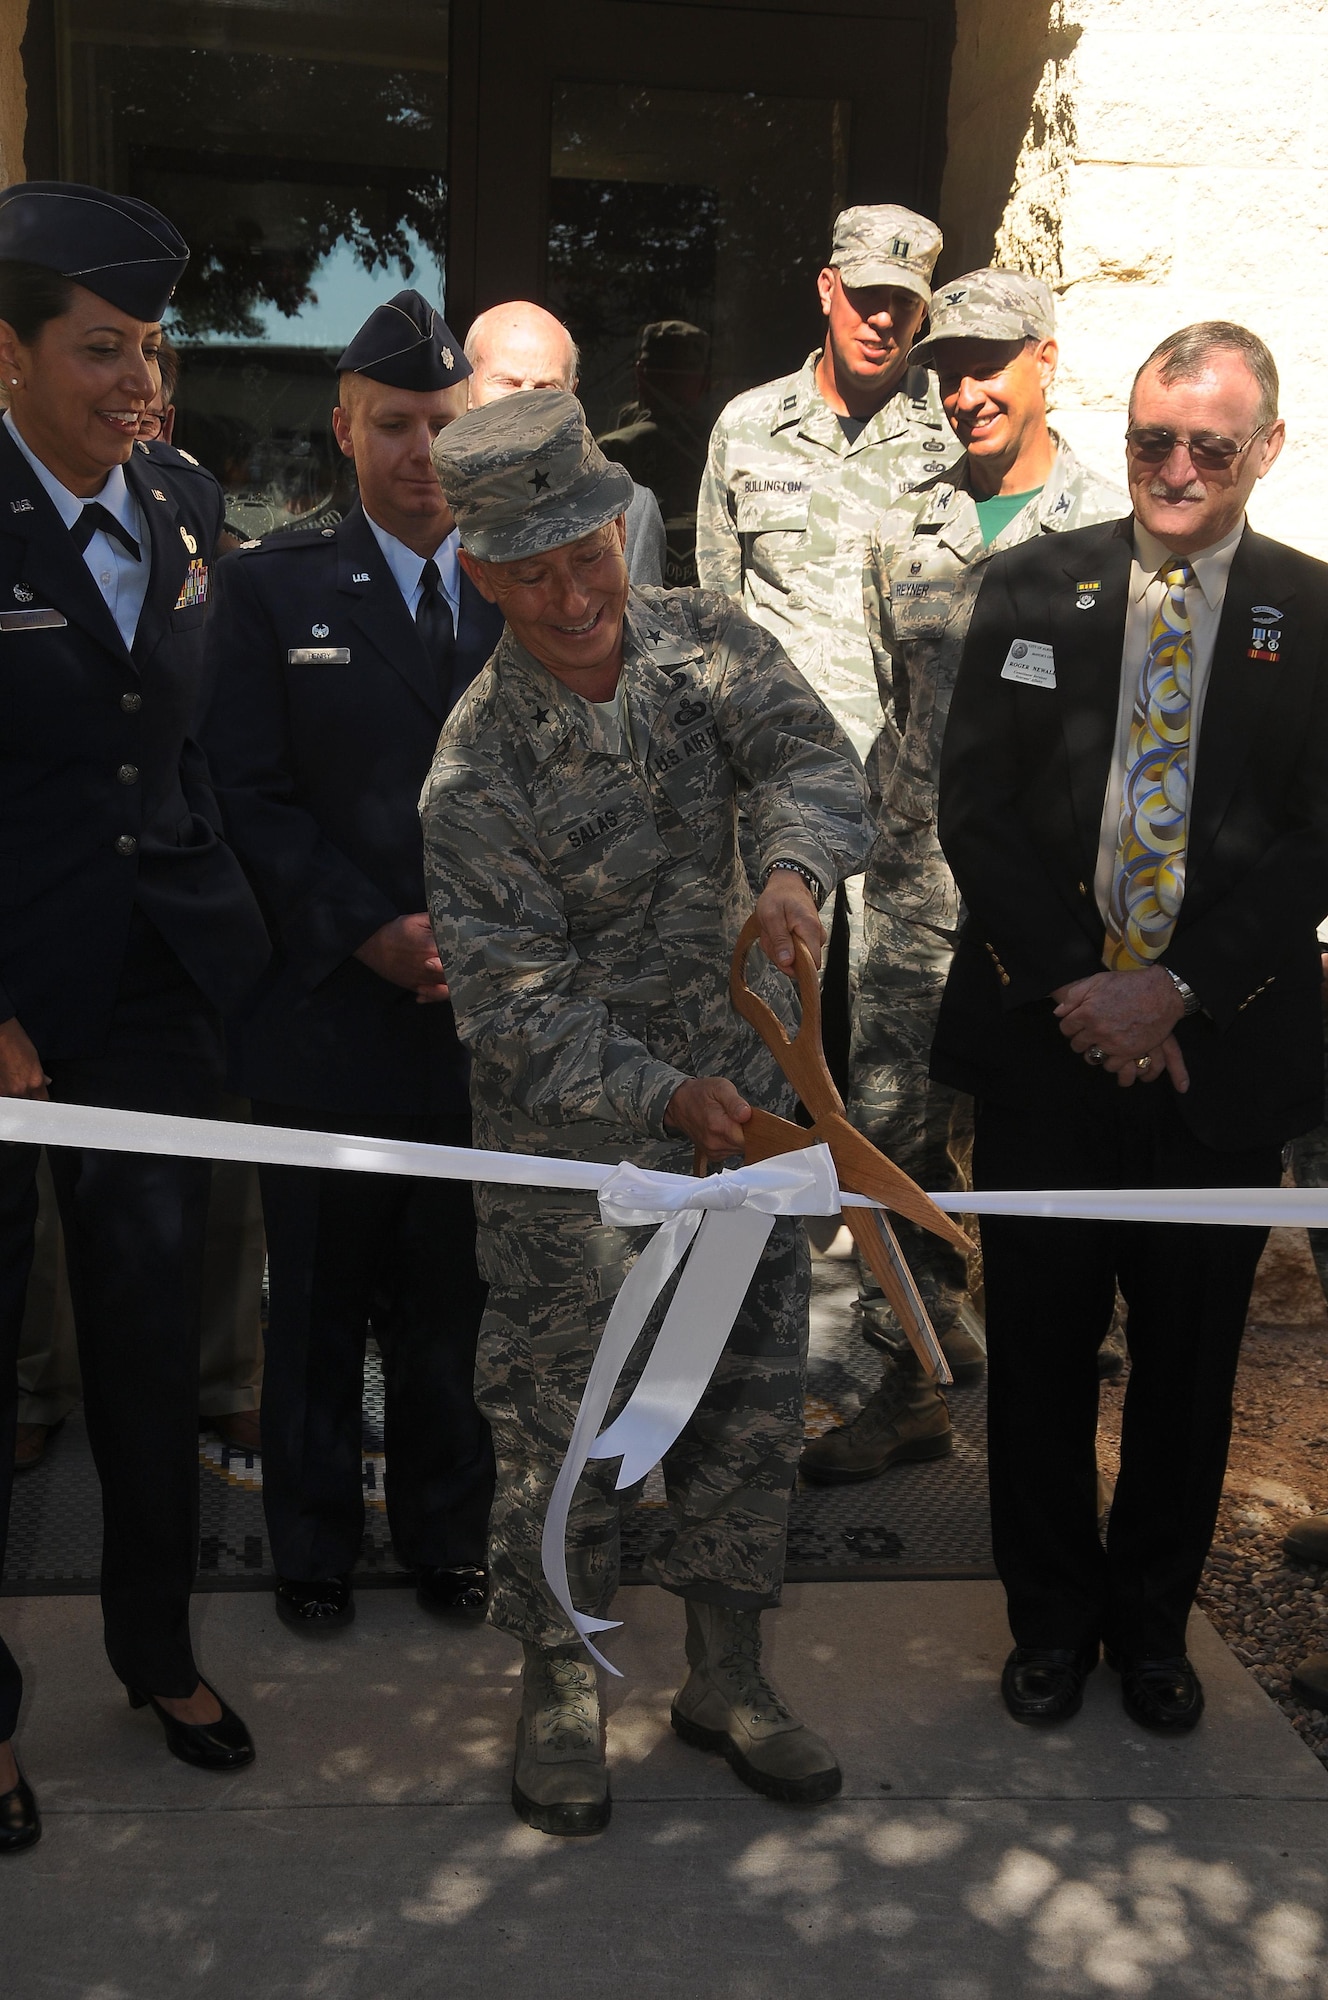 Brig. Gen. Andrew Salas, New Mexico National Guard adjutant general, cuts the ribbon during the dedication of the 250th Intelligence Squadron building Aug. 19. The $5 million state-of-the-art facility features secure workspaces and training areas. (U.S. National Guard photo by Master Sgt. Paula Aragon)
